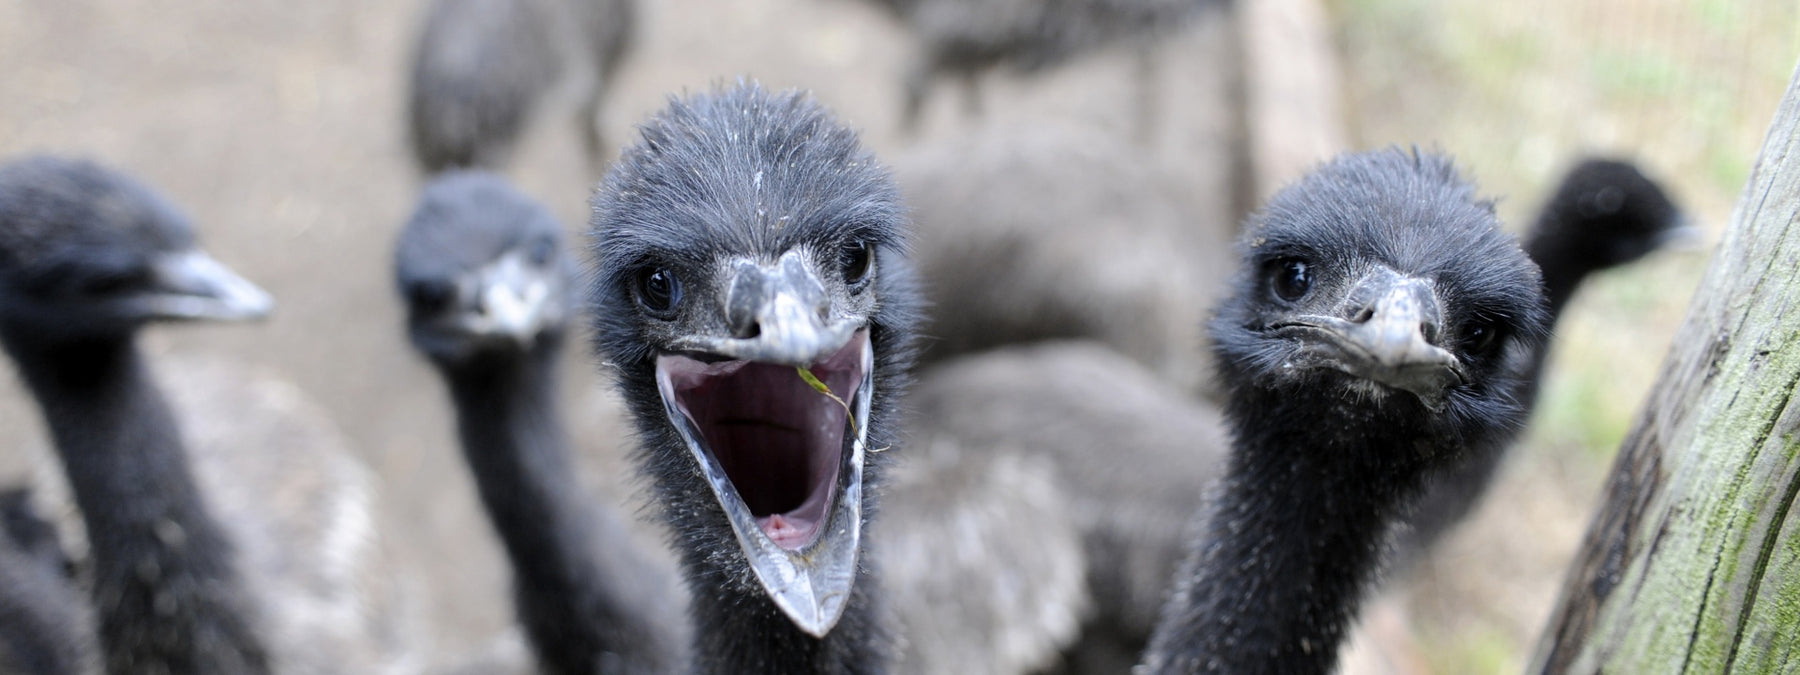 Emu Oil - History, Uses, and Benefits